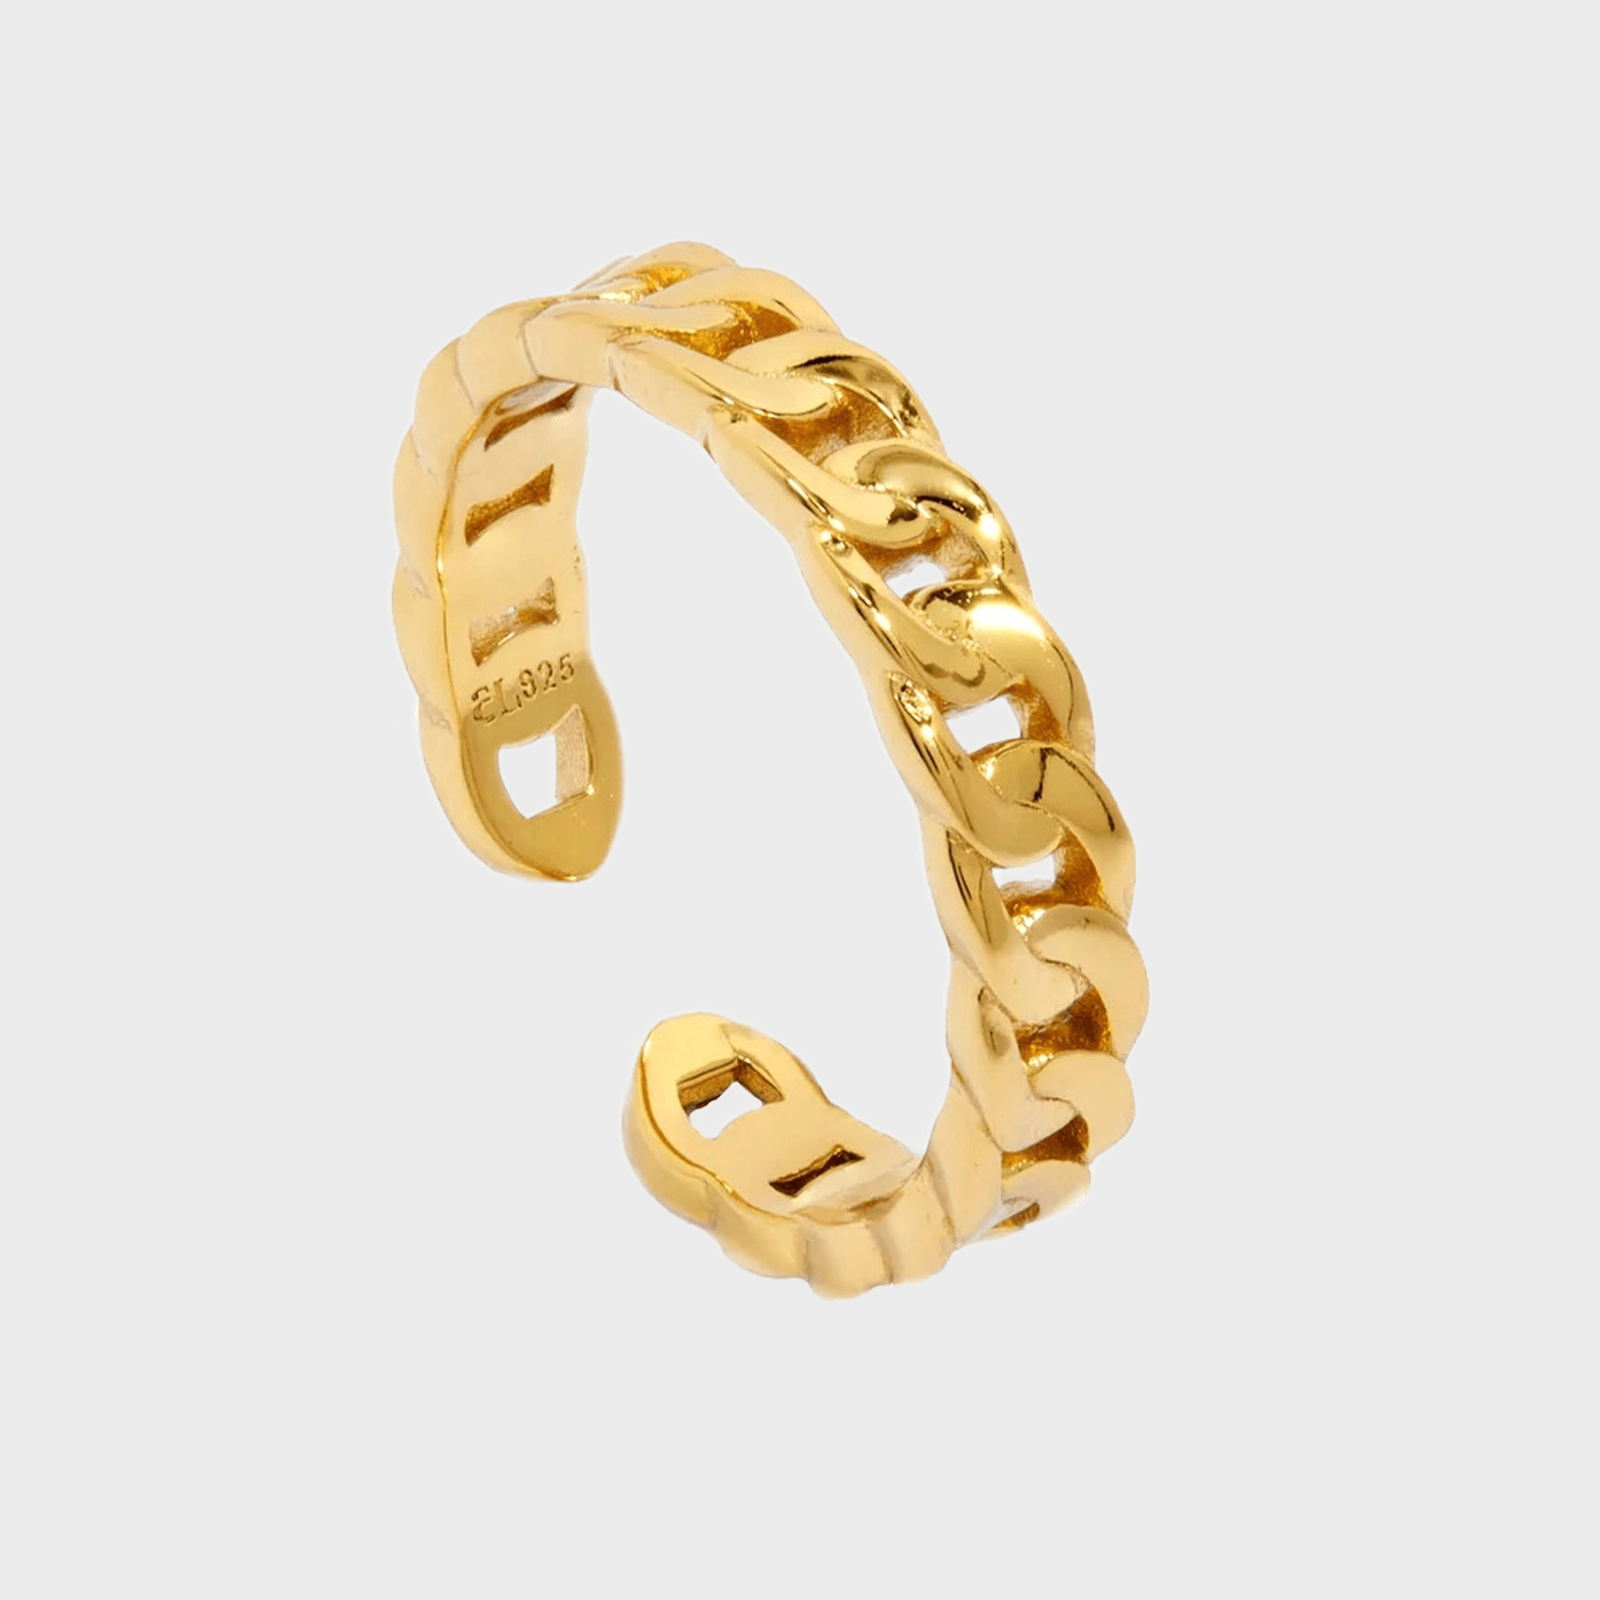 6 Best Rings for Everyday Wear and Special Occasions